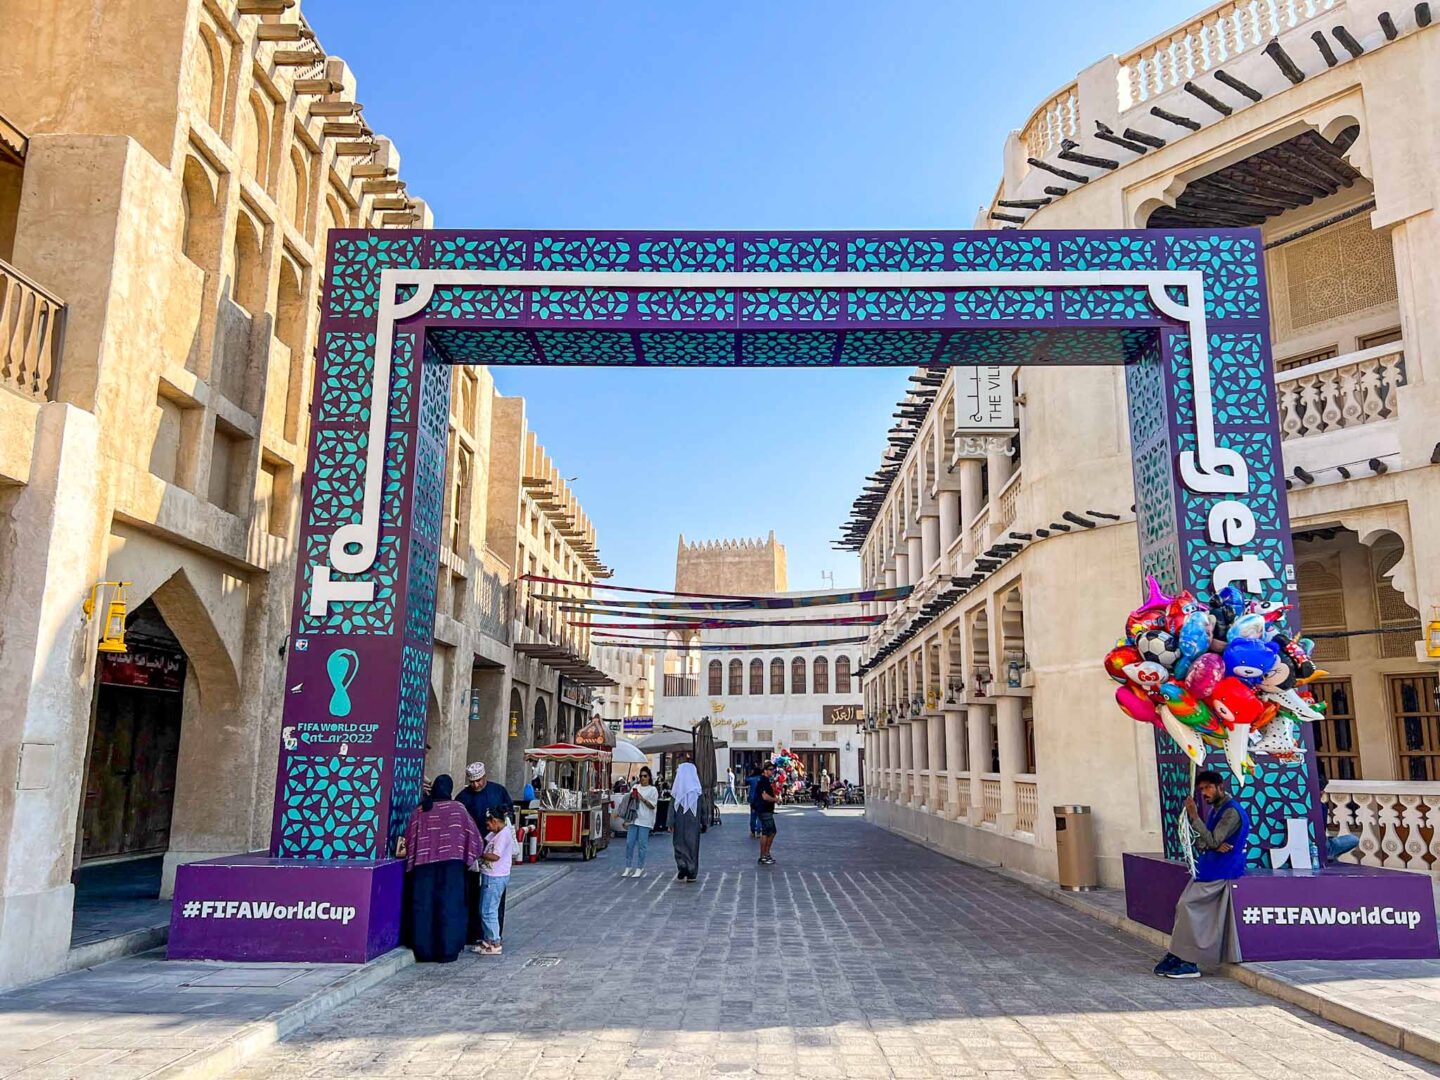 Souq Waqif entrance with World Cup sign, Doha itinerary, Qatar itinerary, 